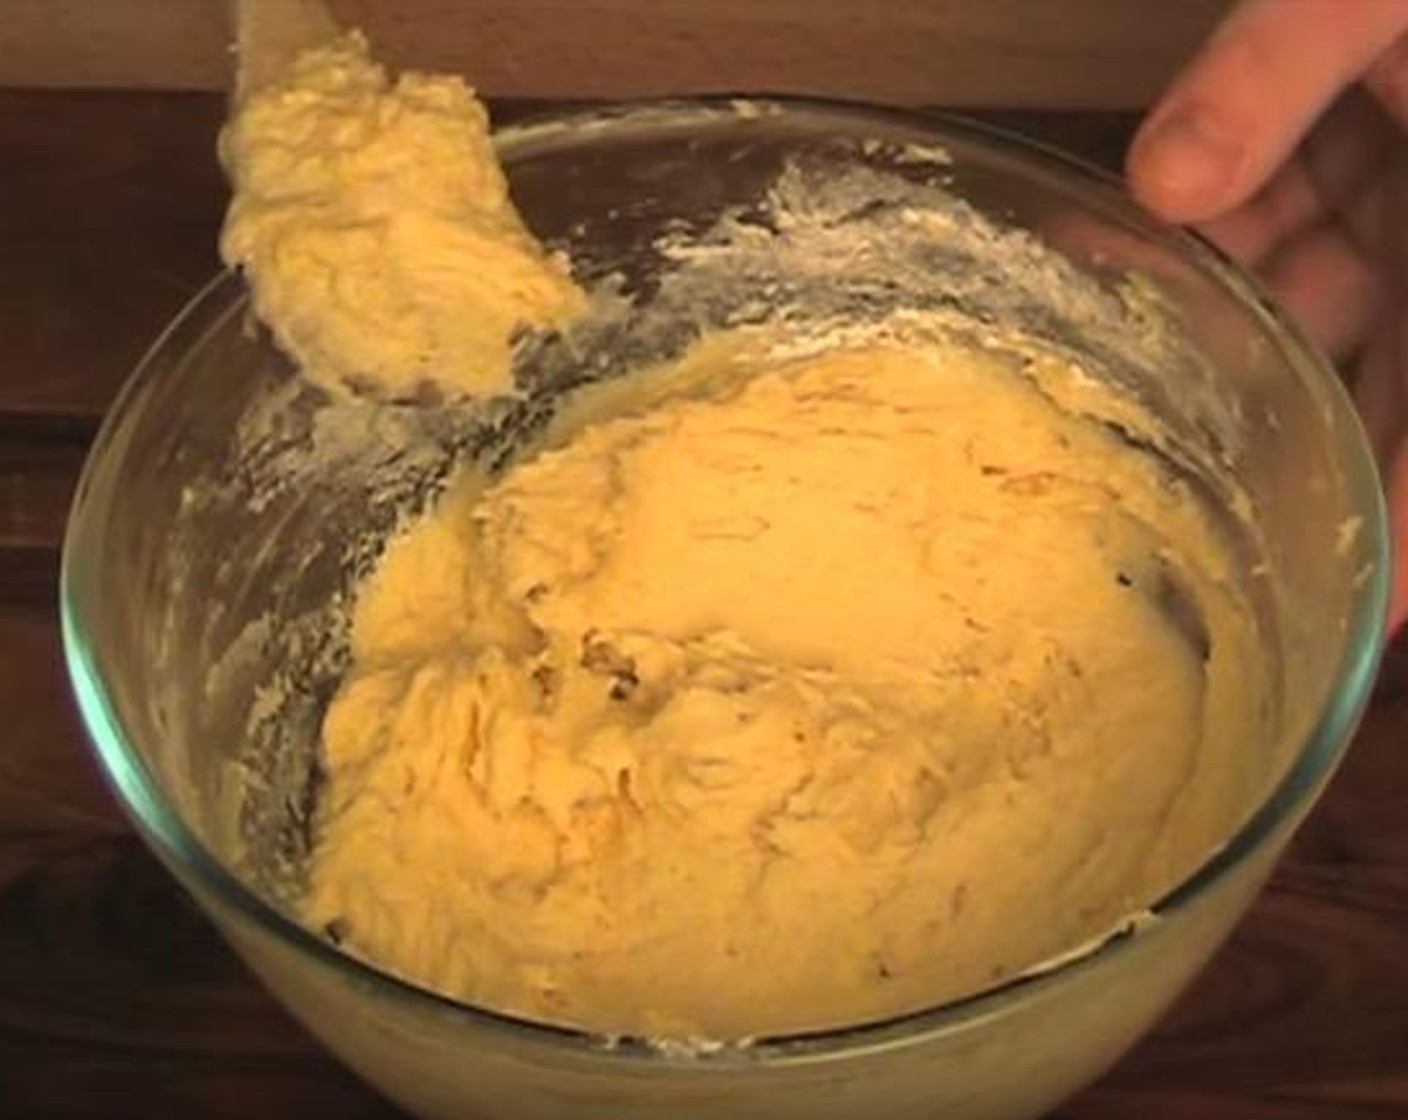 step 4 Add Self-Rising Flour (1 1/4 cups) and Milk (1/4 cup). With a spoon, mix together until smooth.